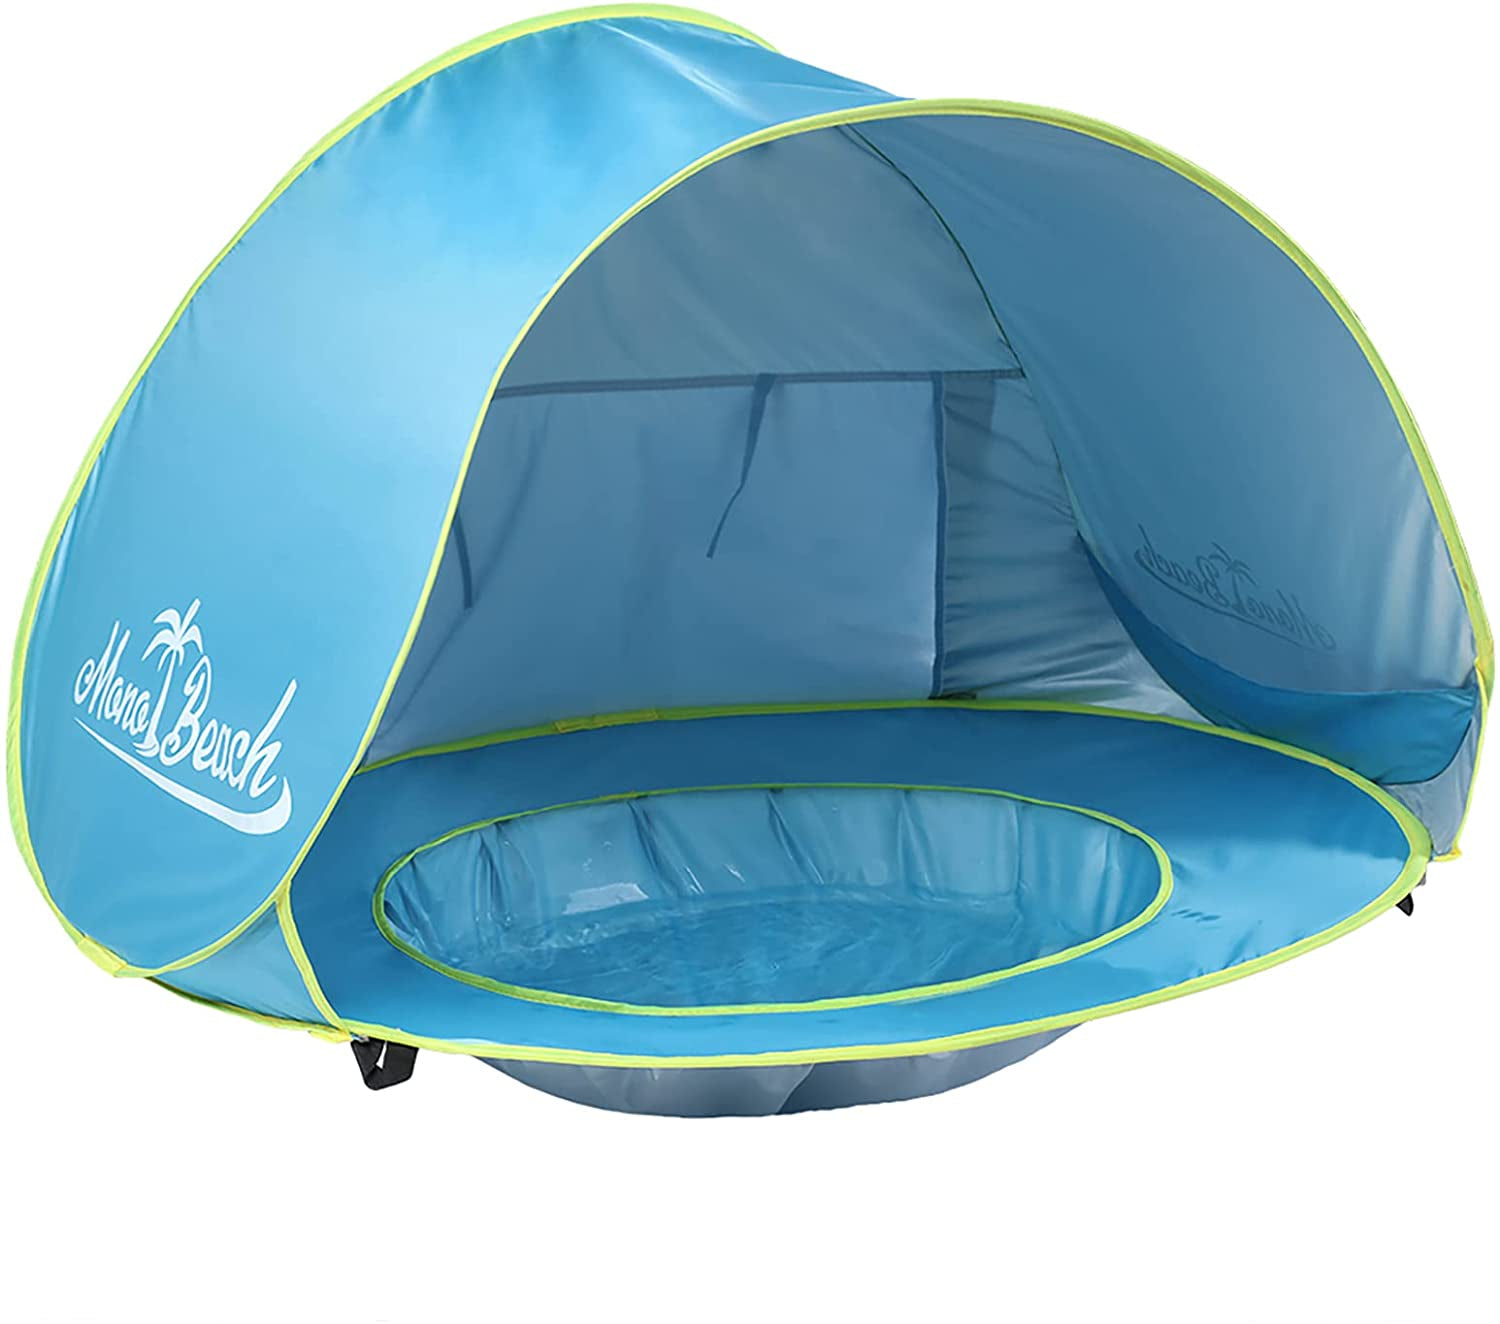 Baby Beach Tent with Pool - Portable Shade Pool UV Protection Sun Shelter for Infant